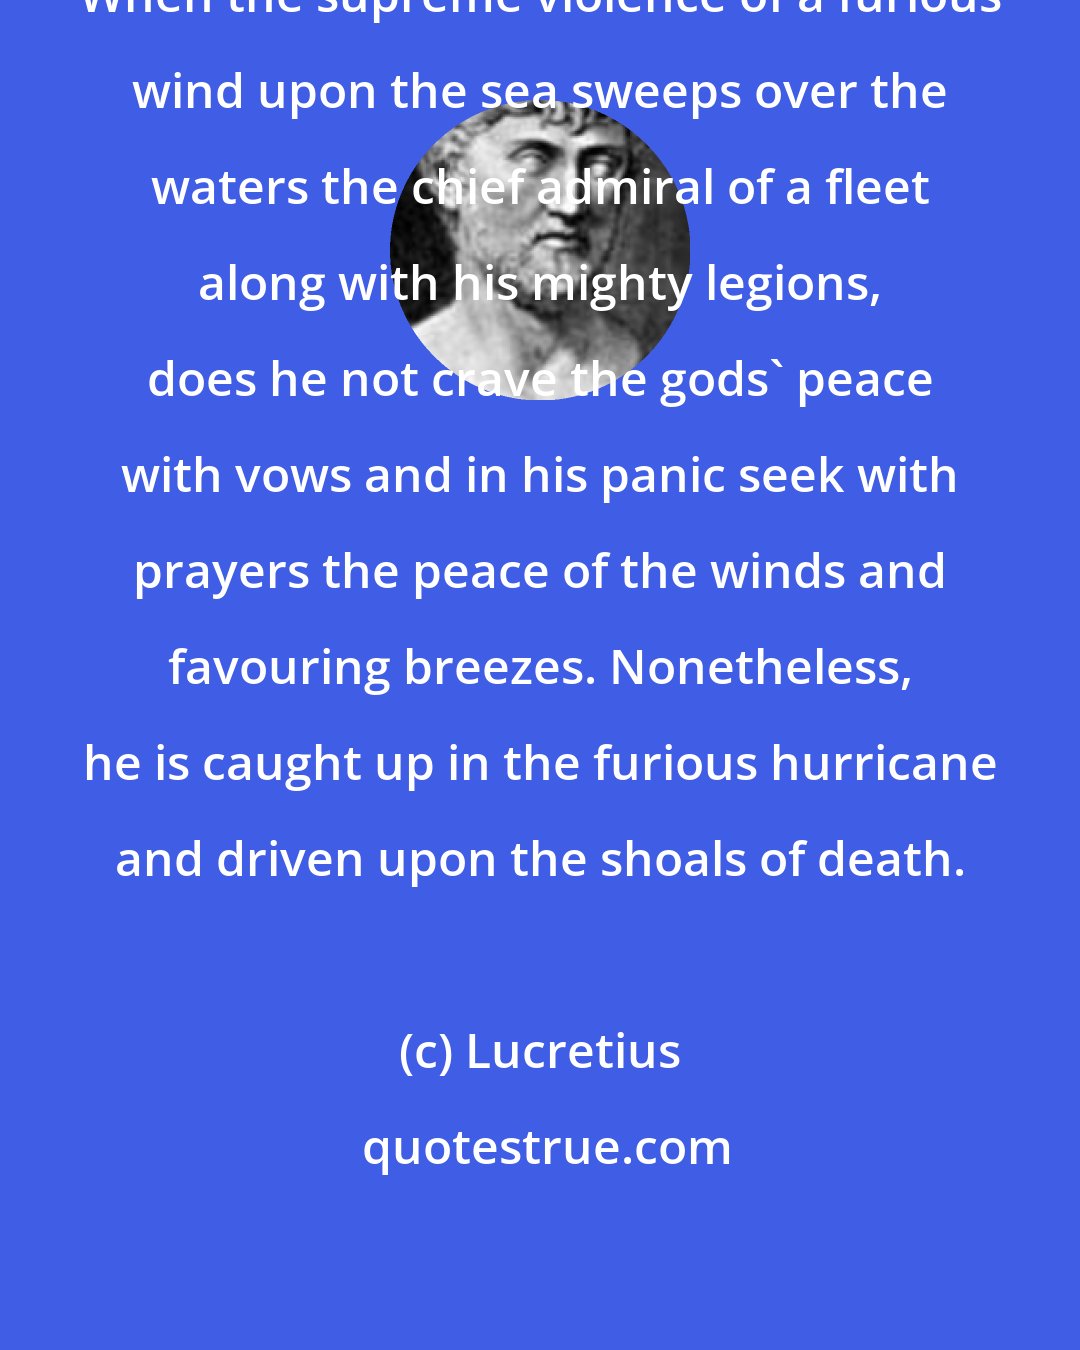 Lucretius: When the supreme violence of a furious wind upon the sea sweeps over the waters the chief admiral of a fleet along with his mighty legions, does he not crave the gods' peace with vows and in his panic seek with prayers the peace of the winds and favouring breezes. Nonetheless, he is caught up in the furious hurricane and driven upon the shoals of death.